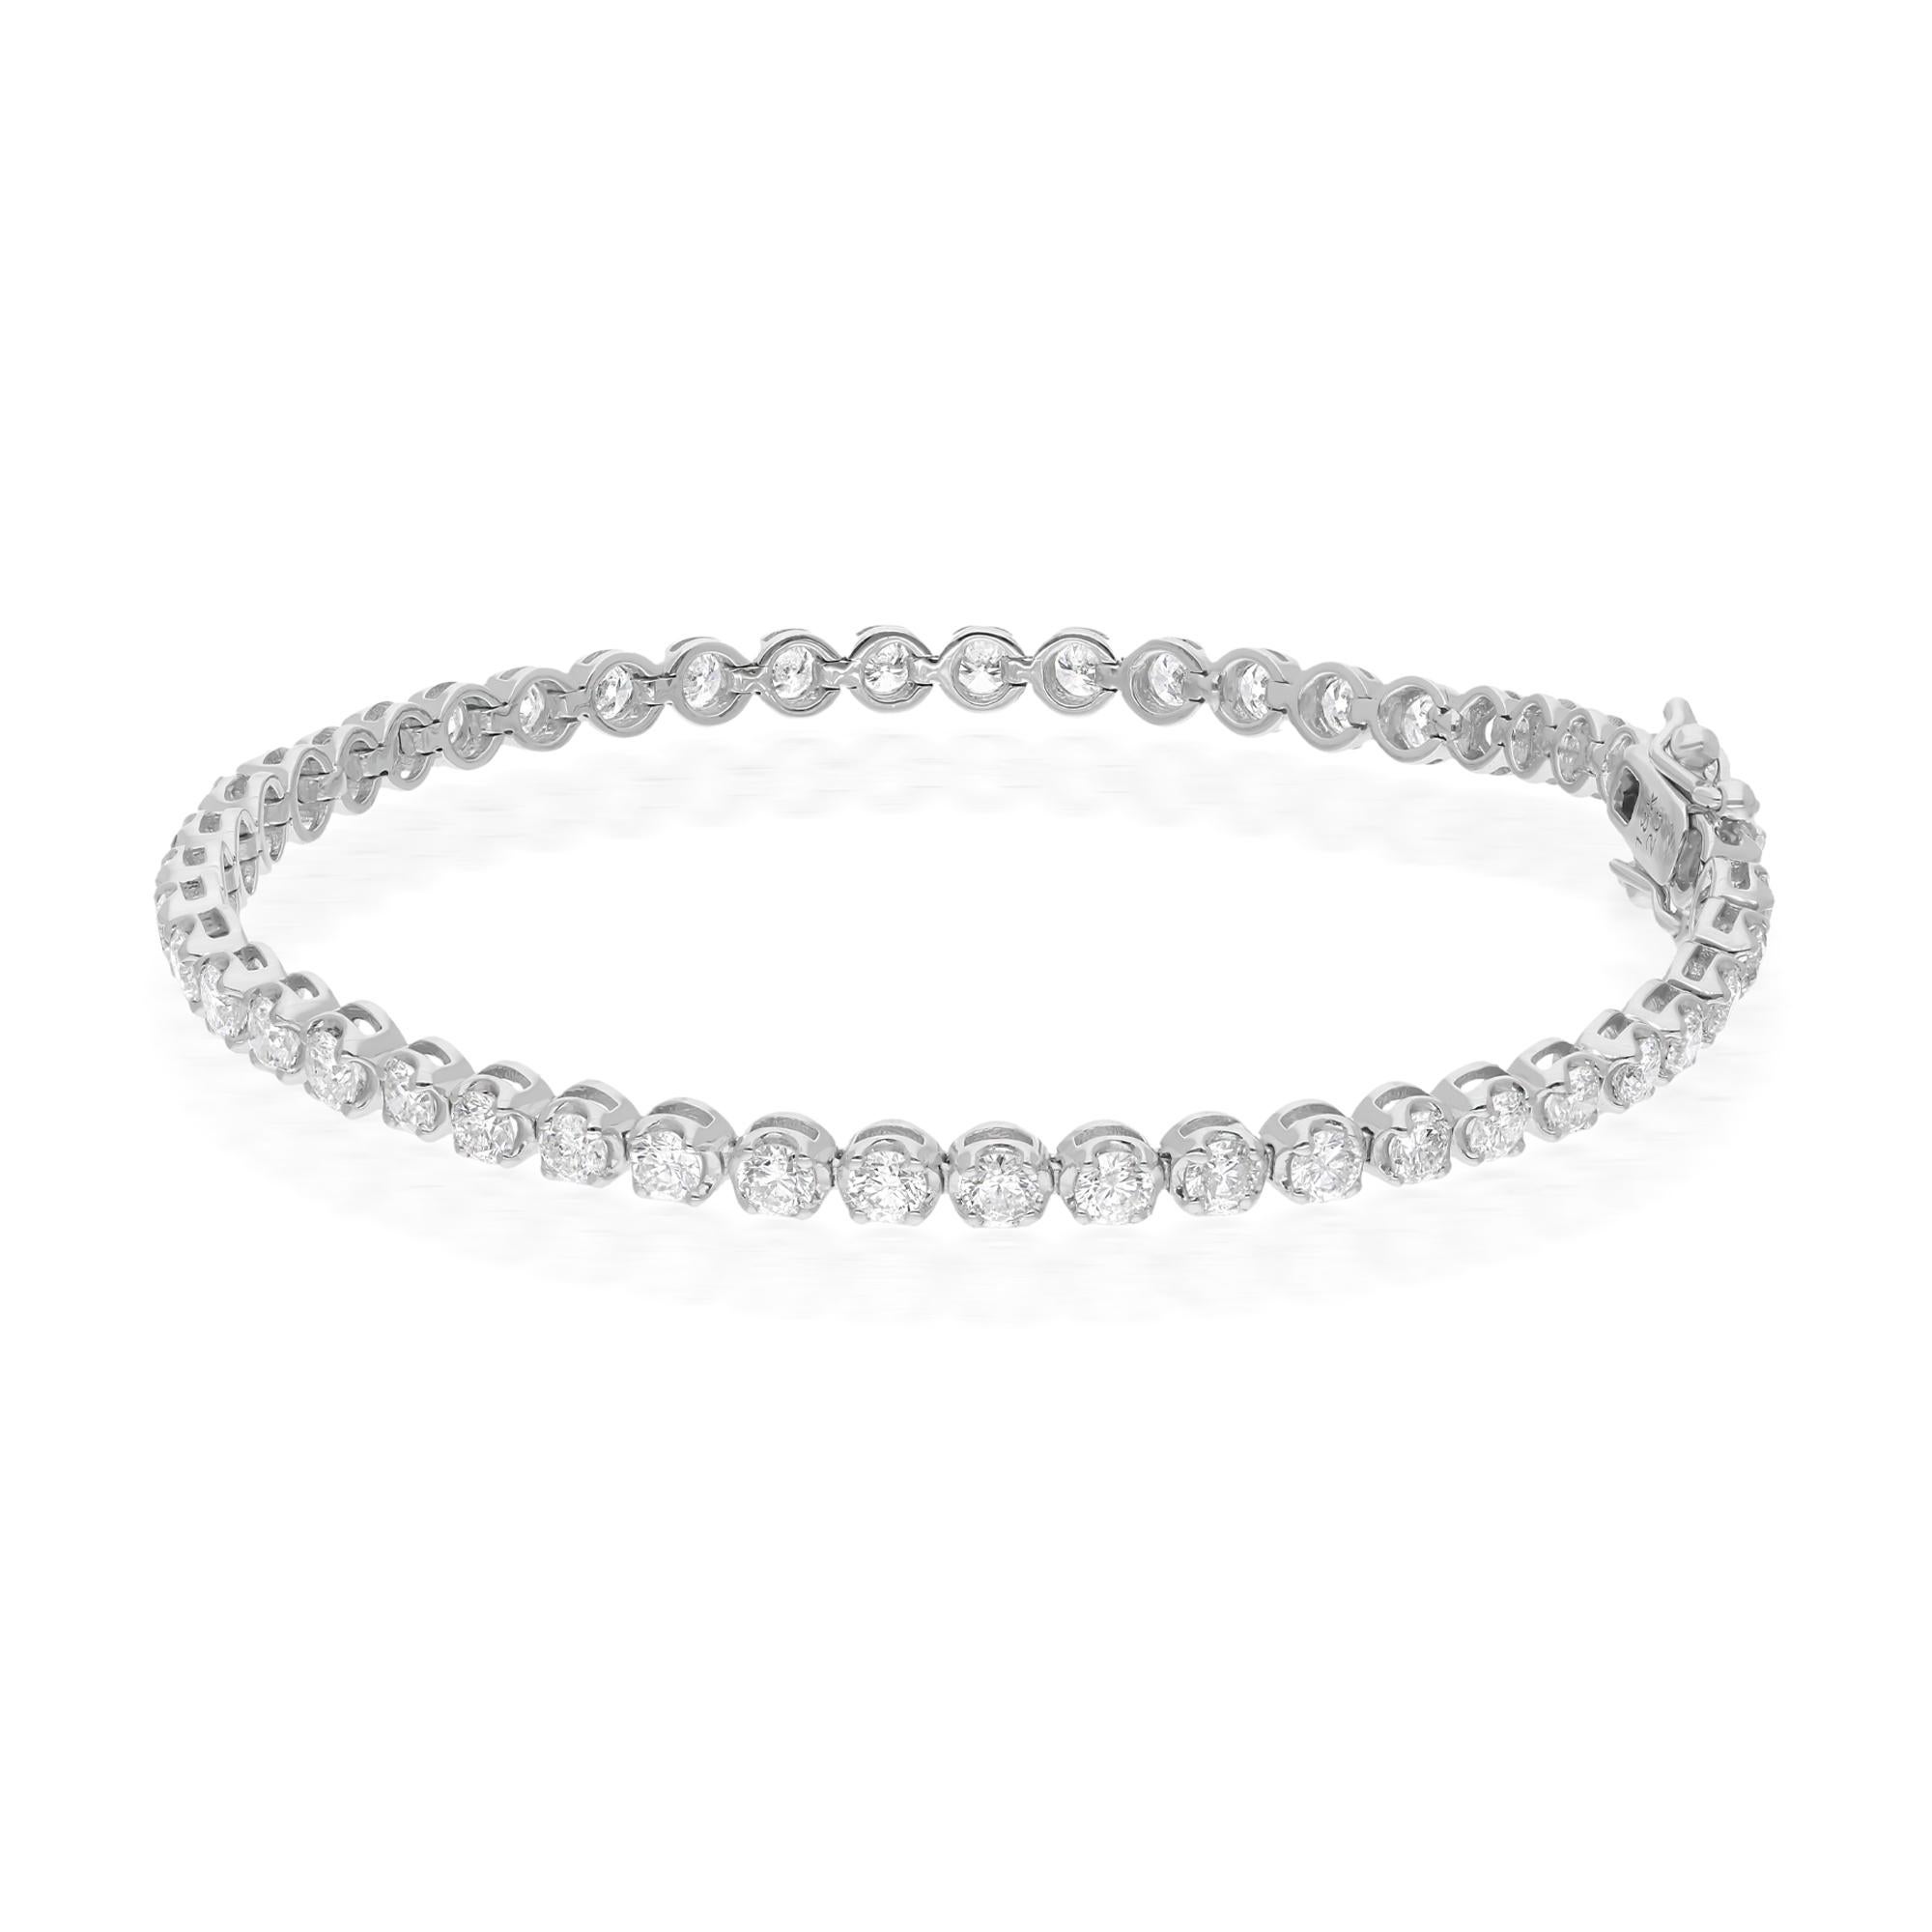 Elevate your elegance with the timeless allure of this exquisite SI clarity, HI color round diamond tennis bracelet, delicately crafted in luxurious 18 karat white gold.

Item Code :- CN-16967
Gross Wt. :- 8.30 gm
18k Solid White Gold Wt. :- 7.50